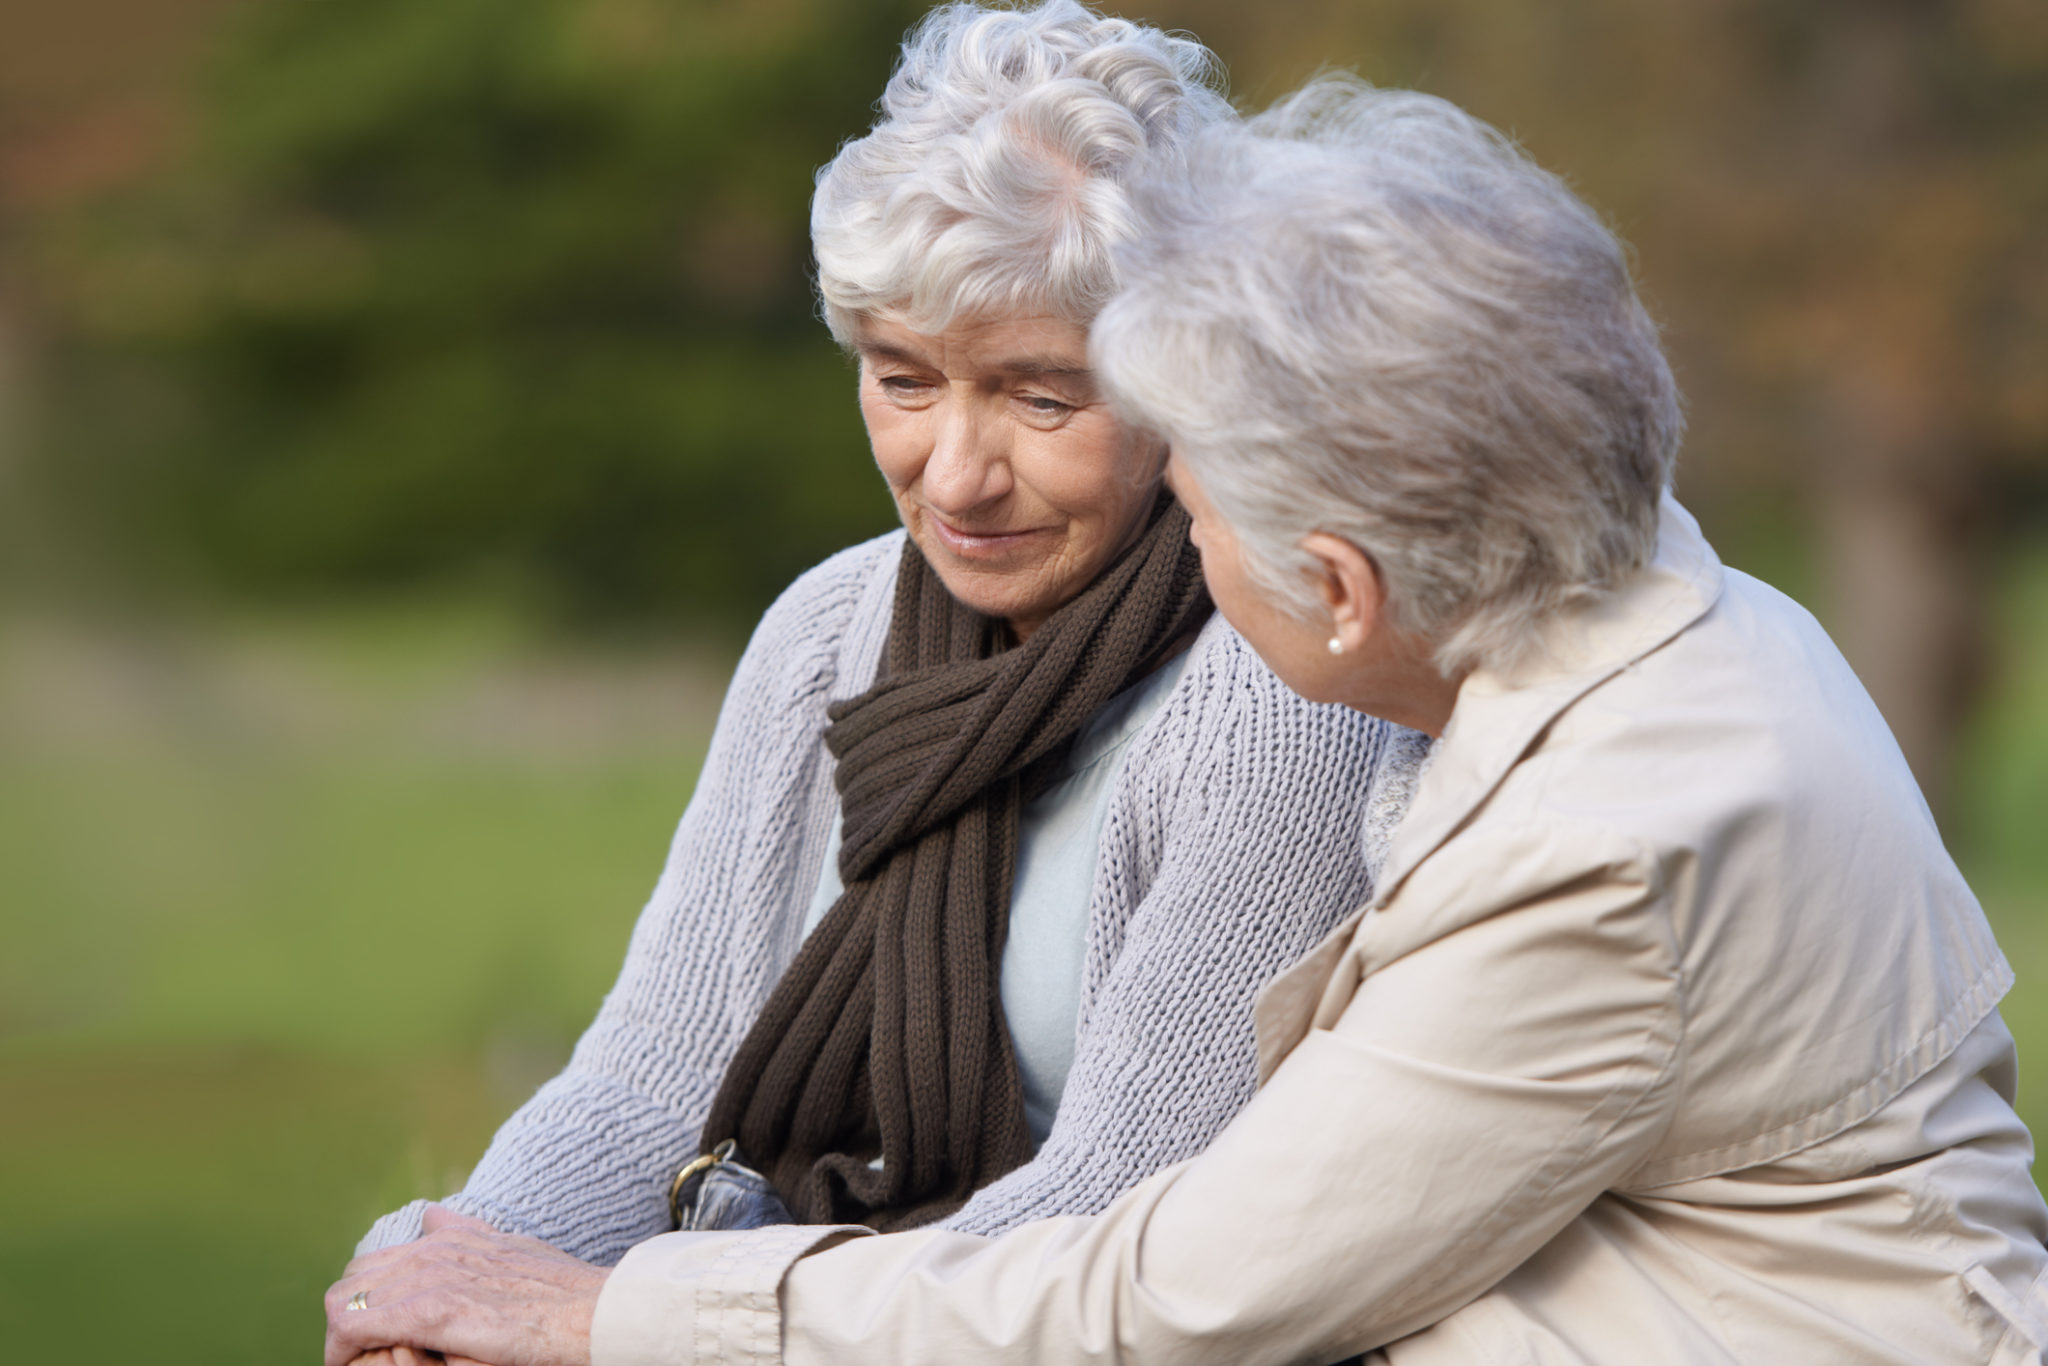 Cropped view of a senior woman caring for her friend